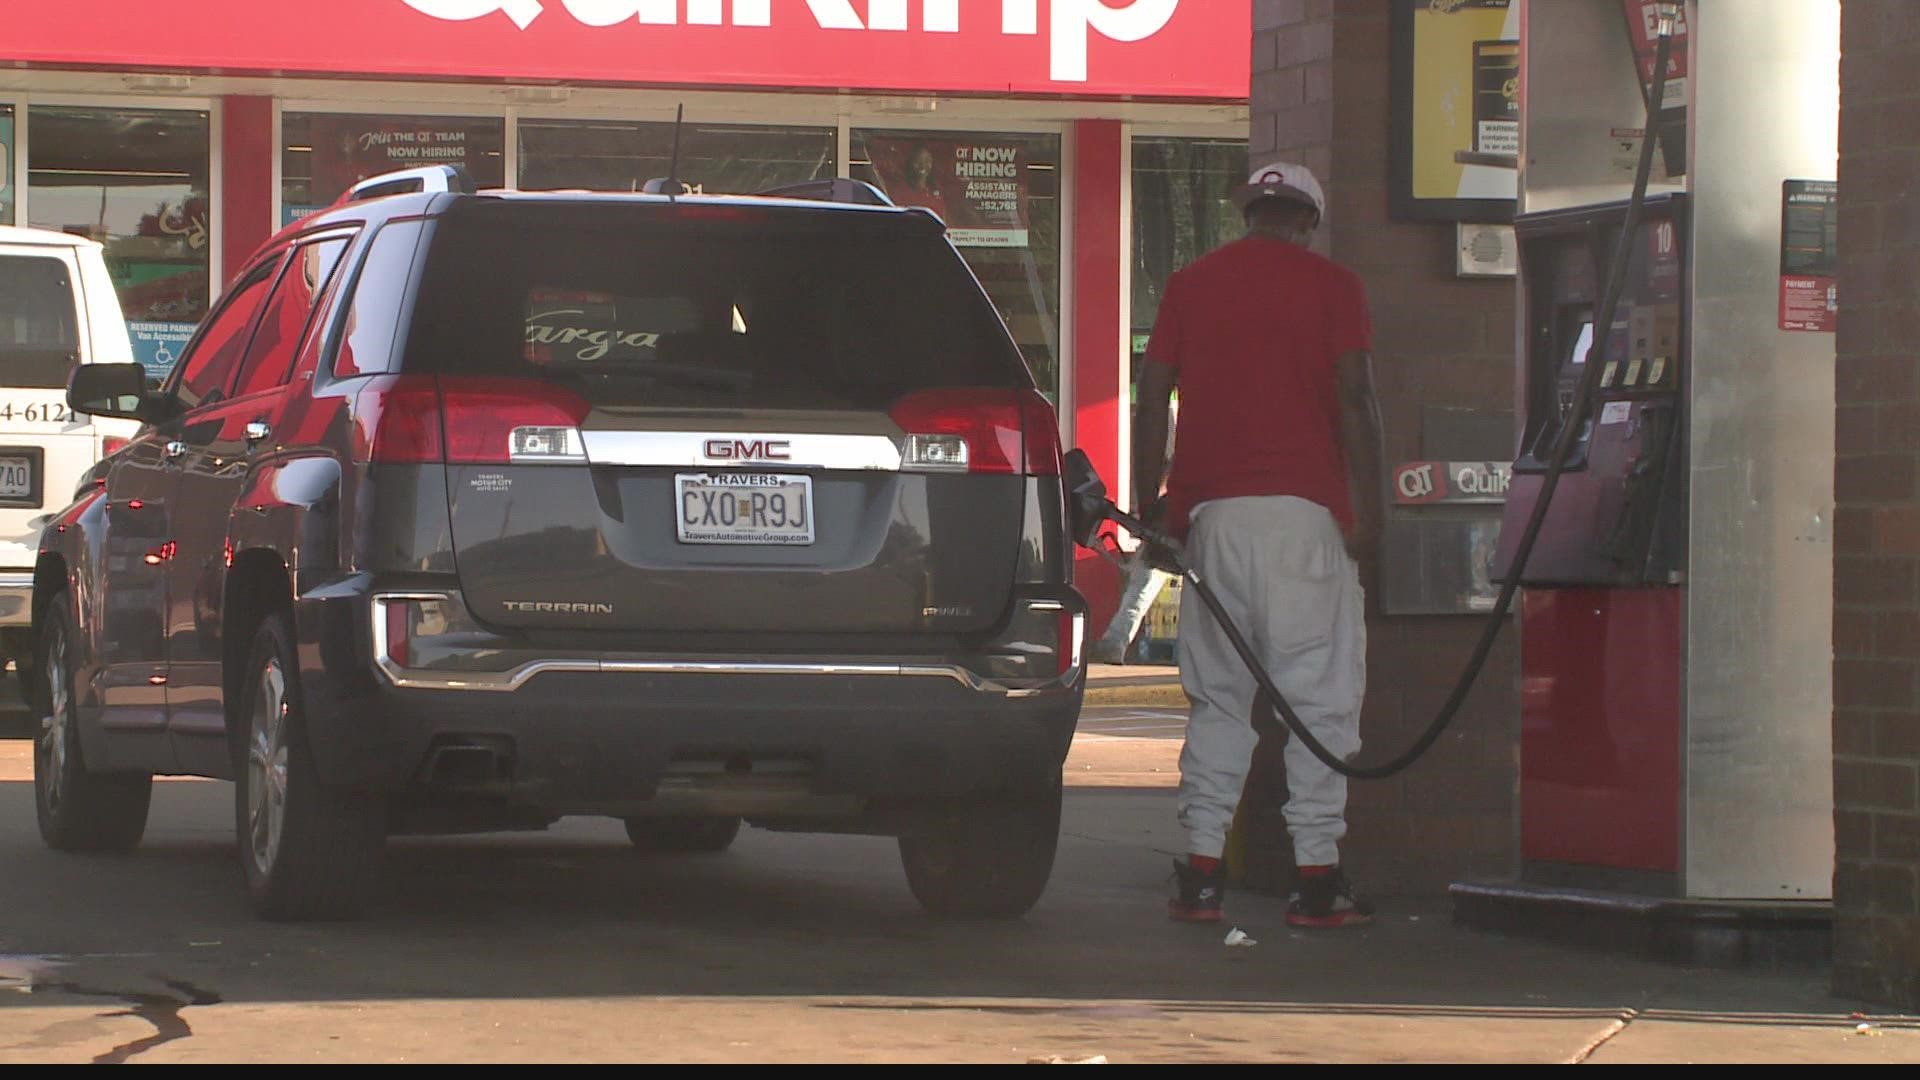 Missouri drivers can start submitting refunds to receive the money they spent on a state gas tax just as the tax increases July 1.